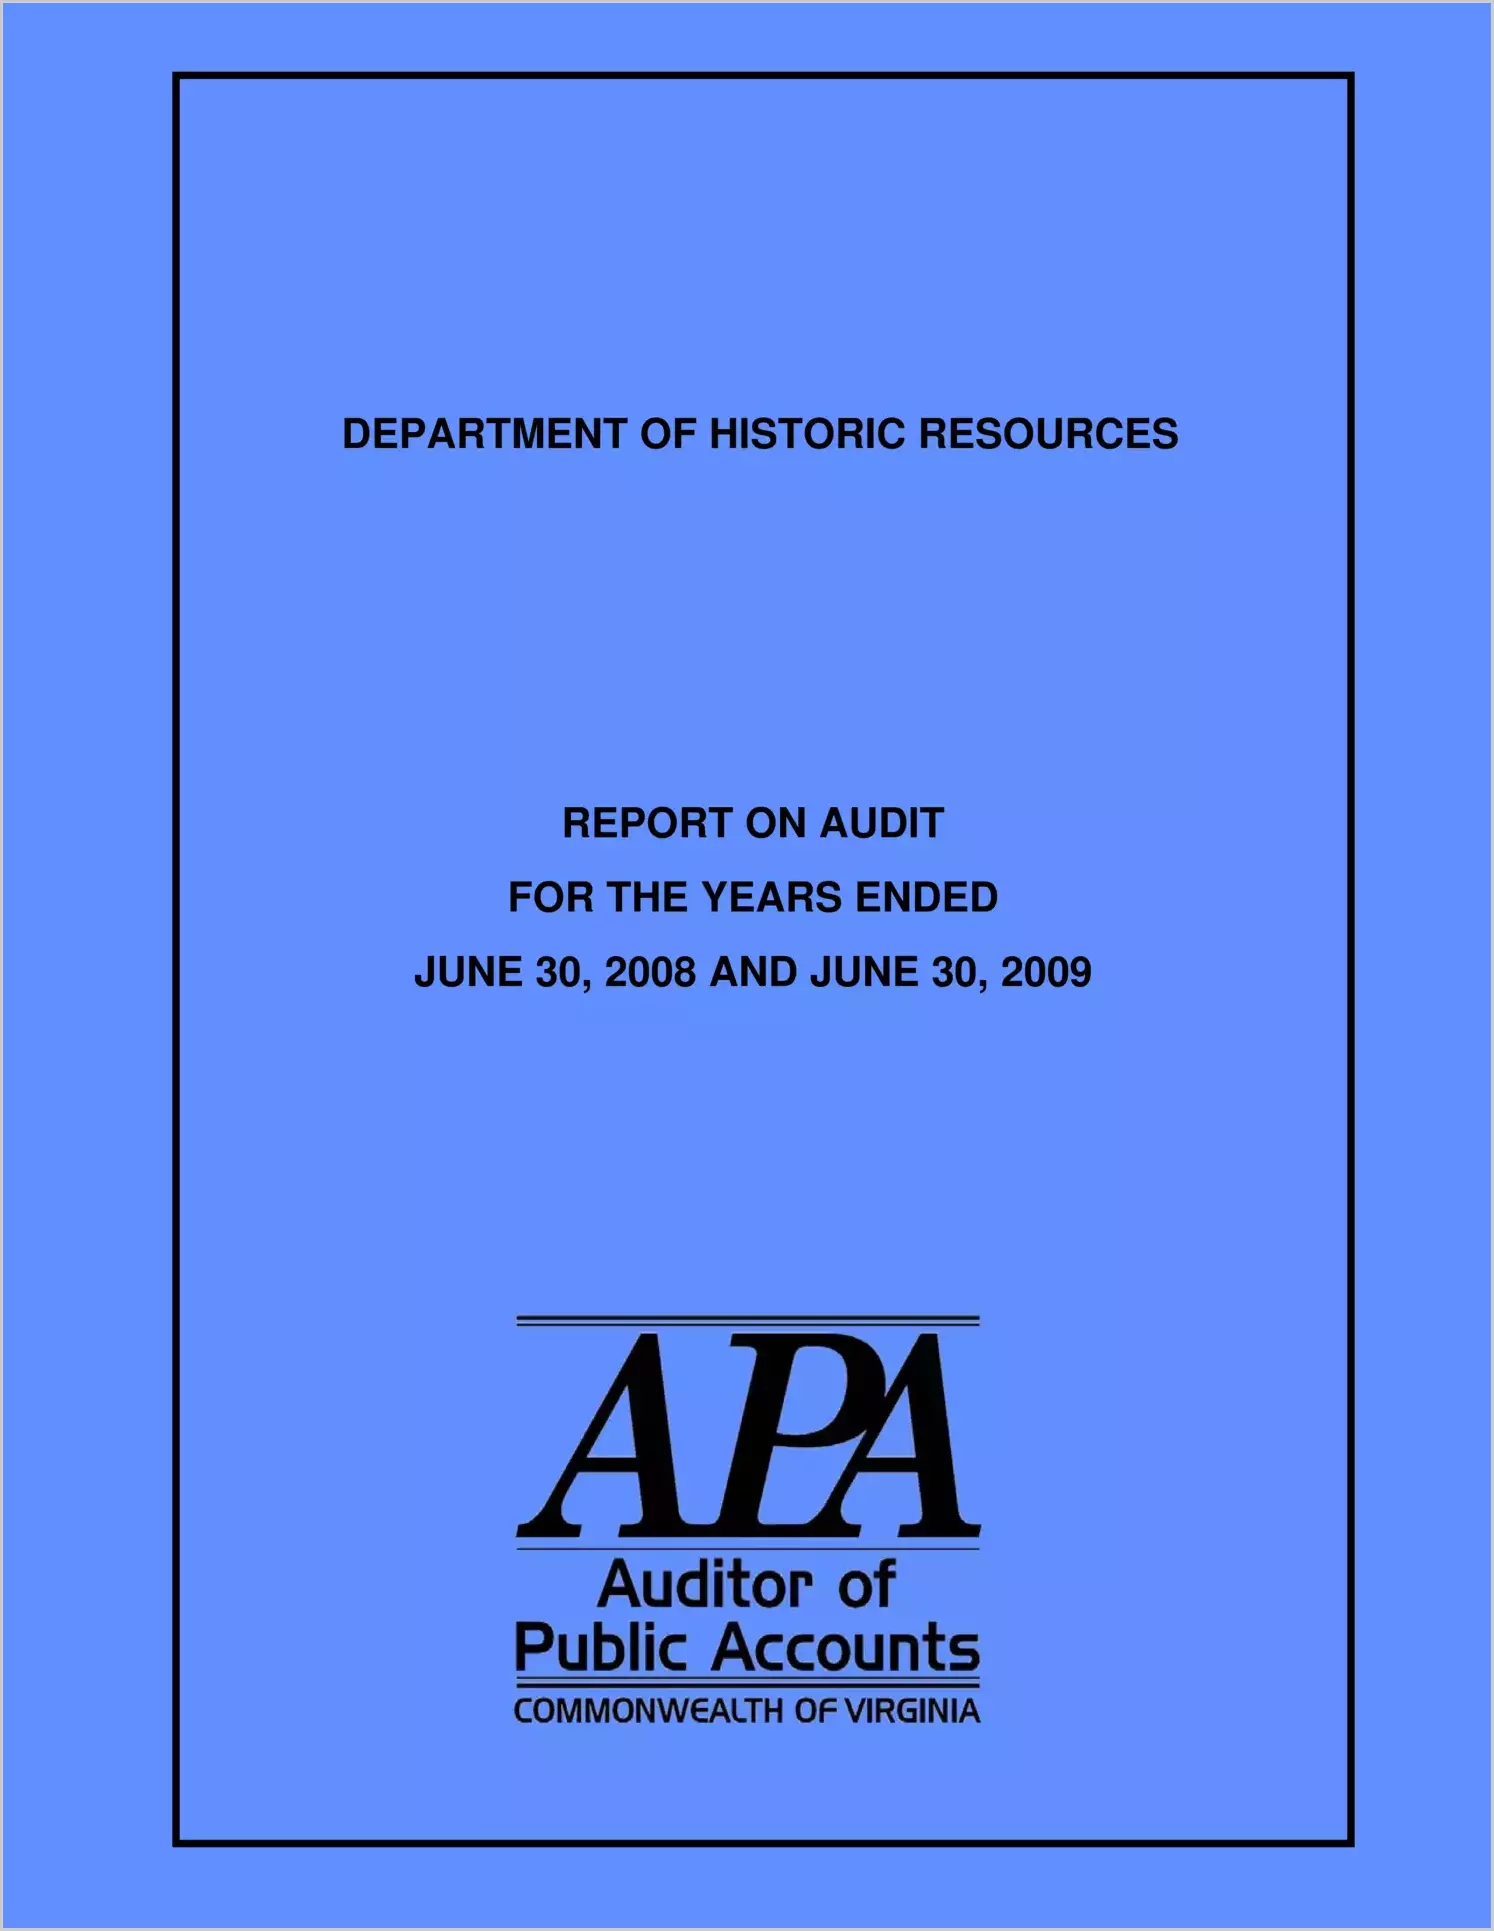 Department of Historic Resources for the years ended June 30, 2008 and June 30, 2009